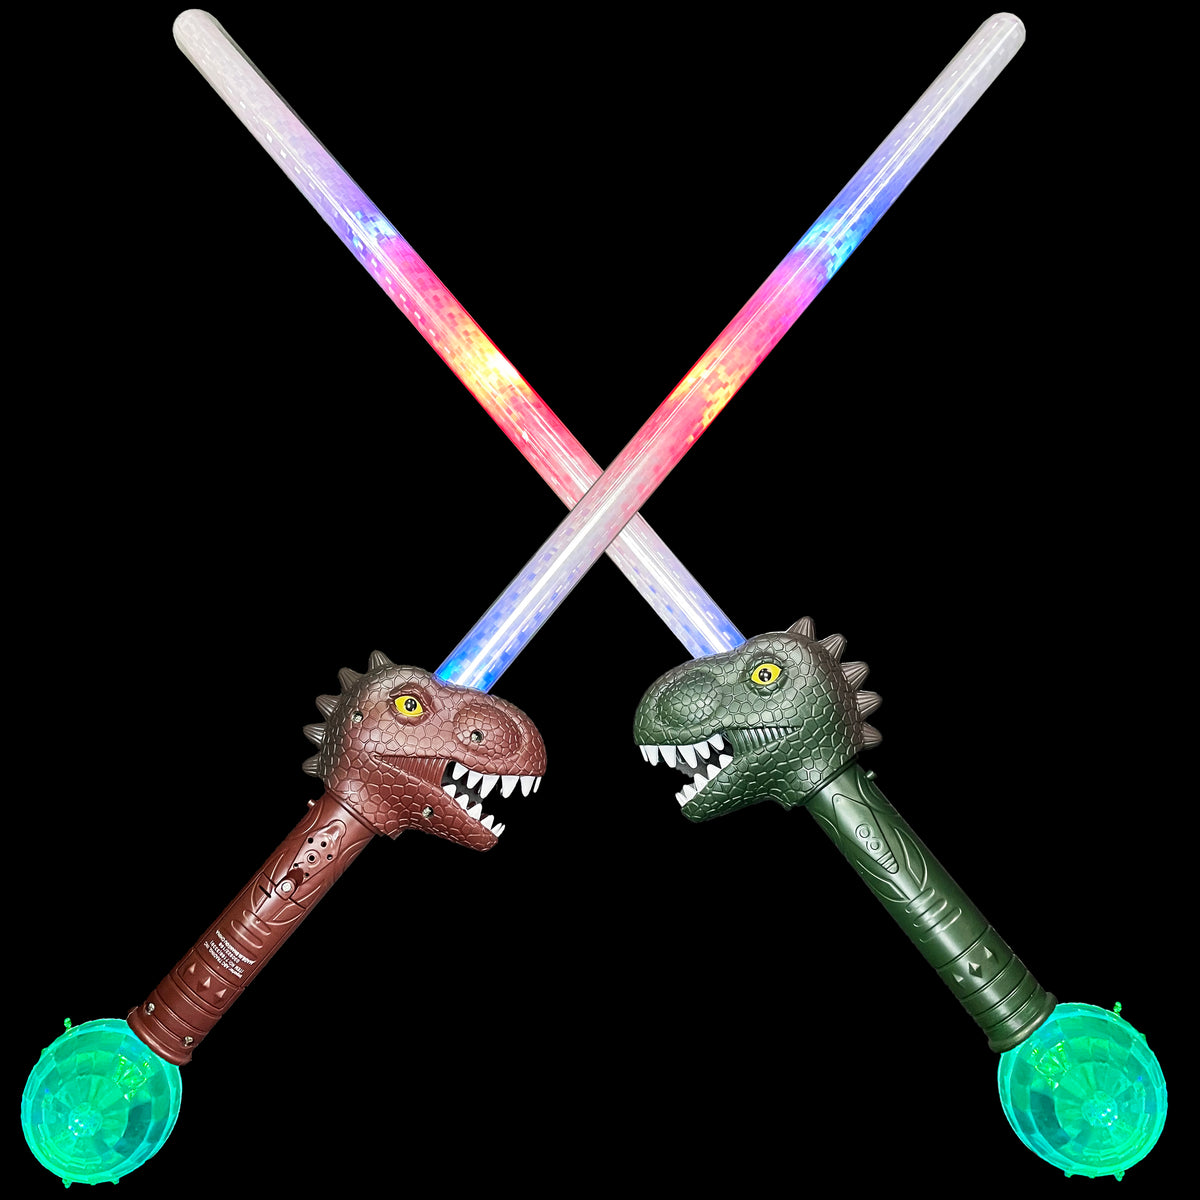 Dino-Sword lets you 1v1 dinosaurs with a Buster sword